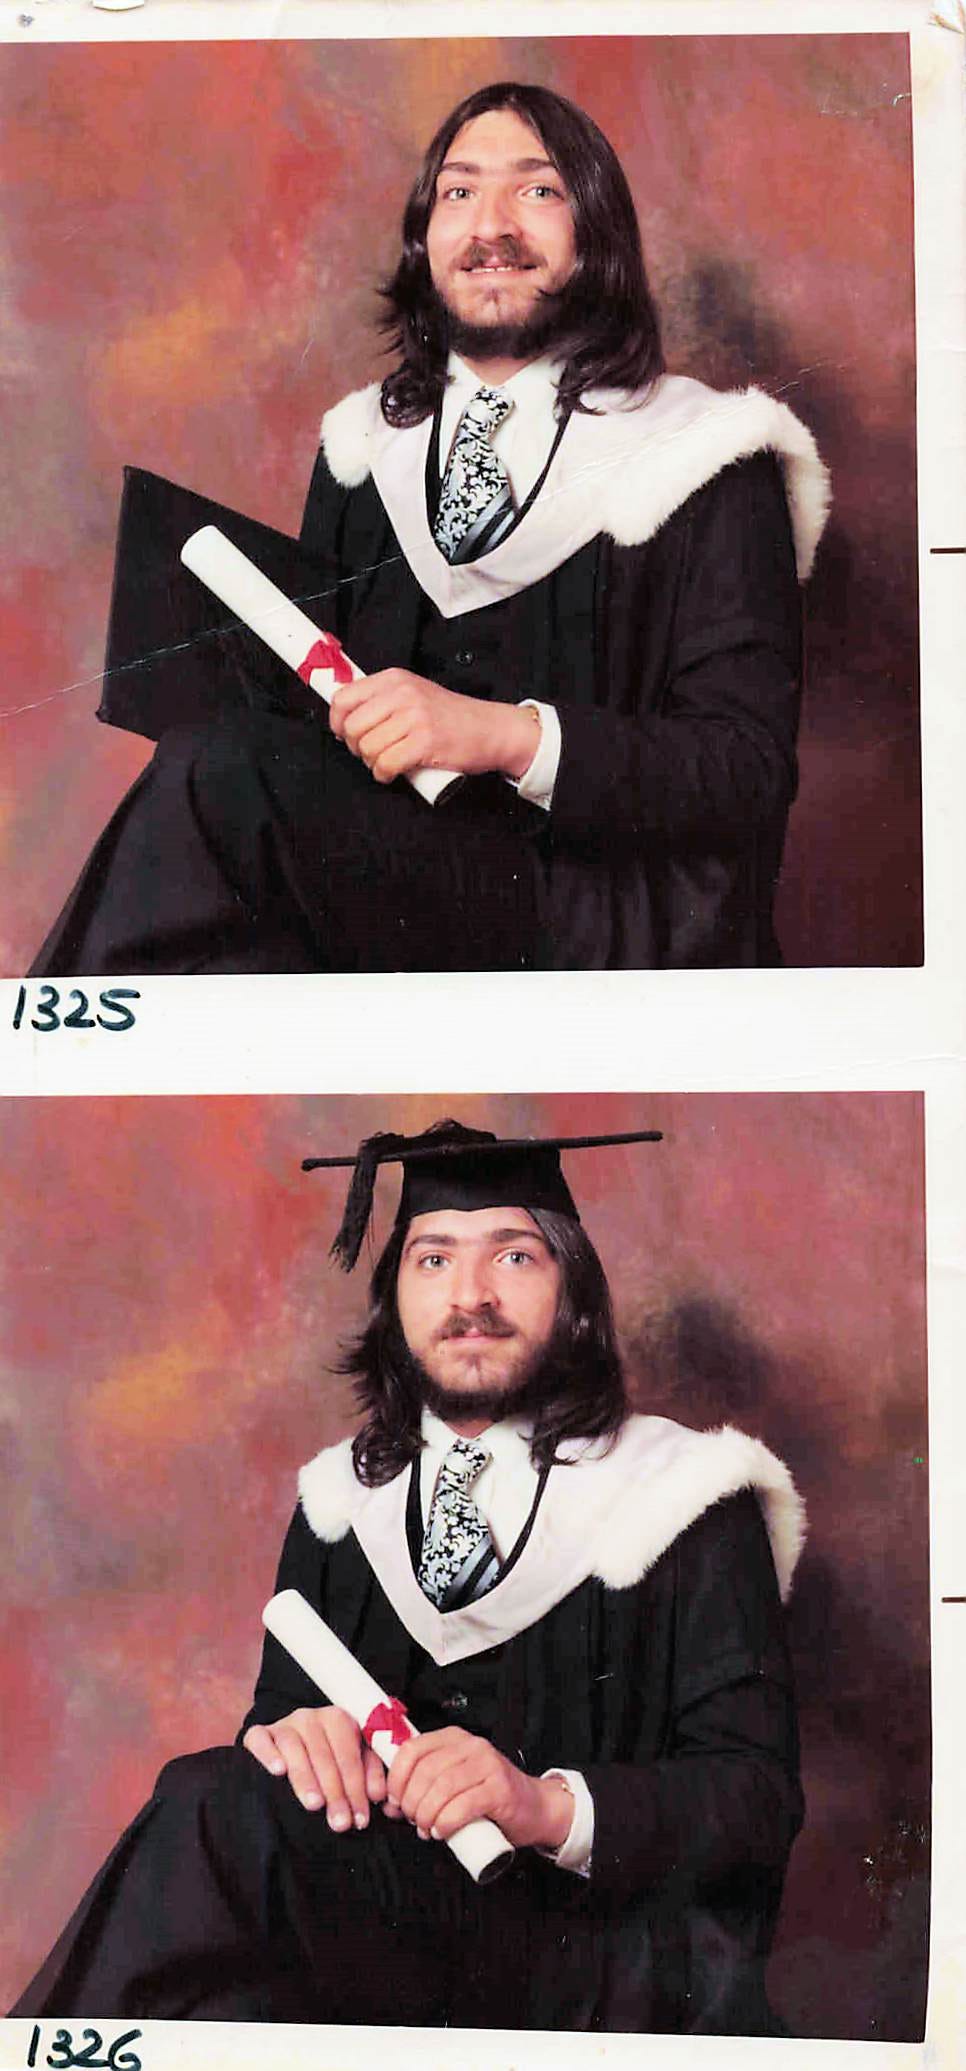 Terry’s graduation day proofs, by unknown photographer